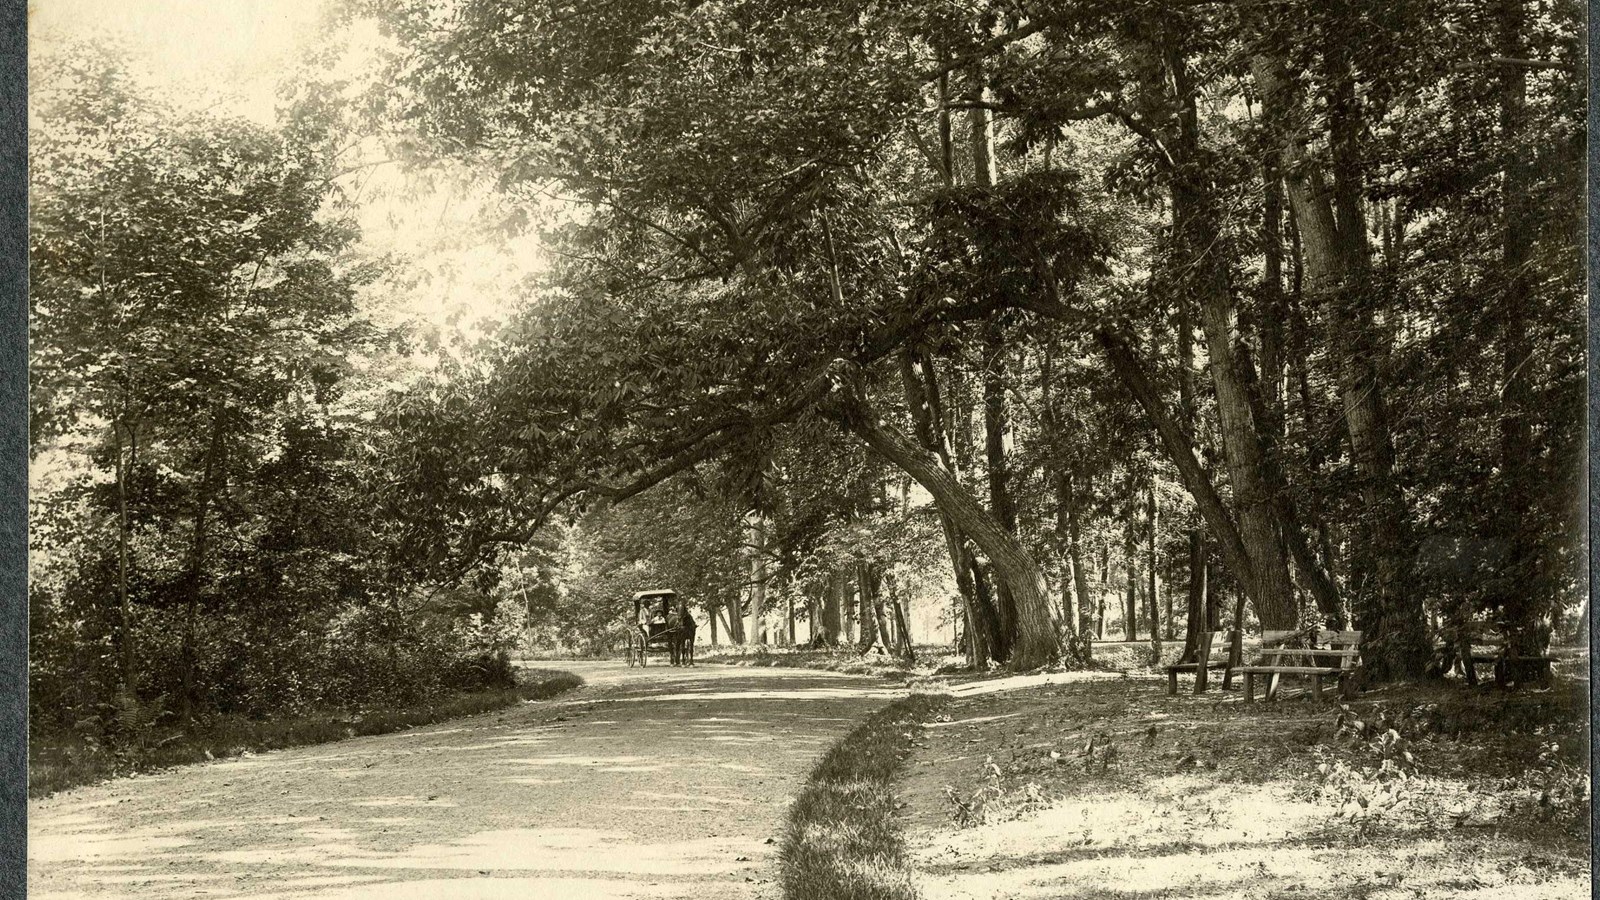 Black and white of curving road lined with grass and trees with horse and carriage on it